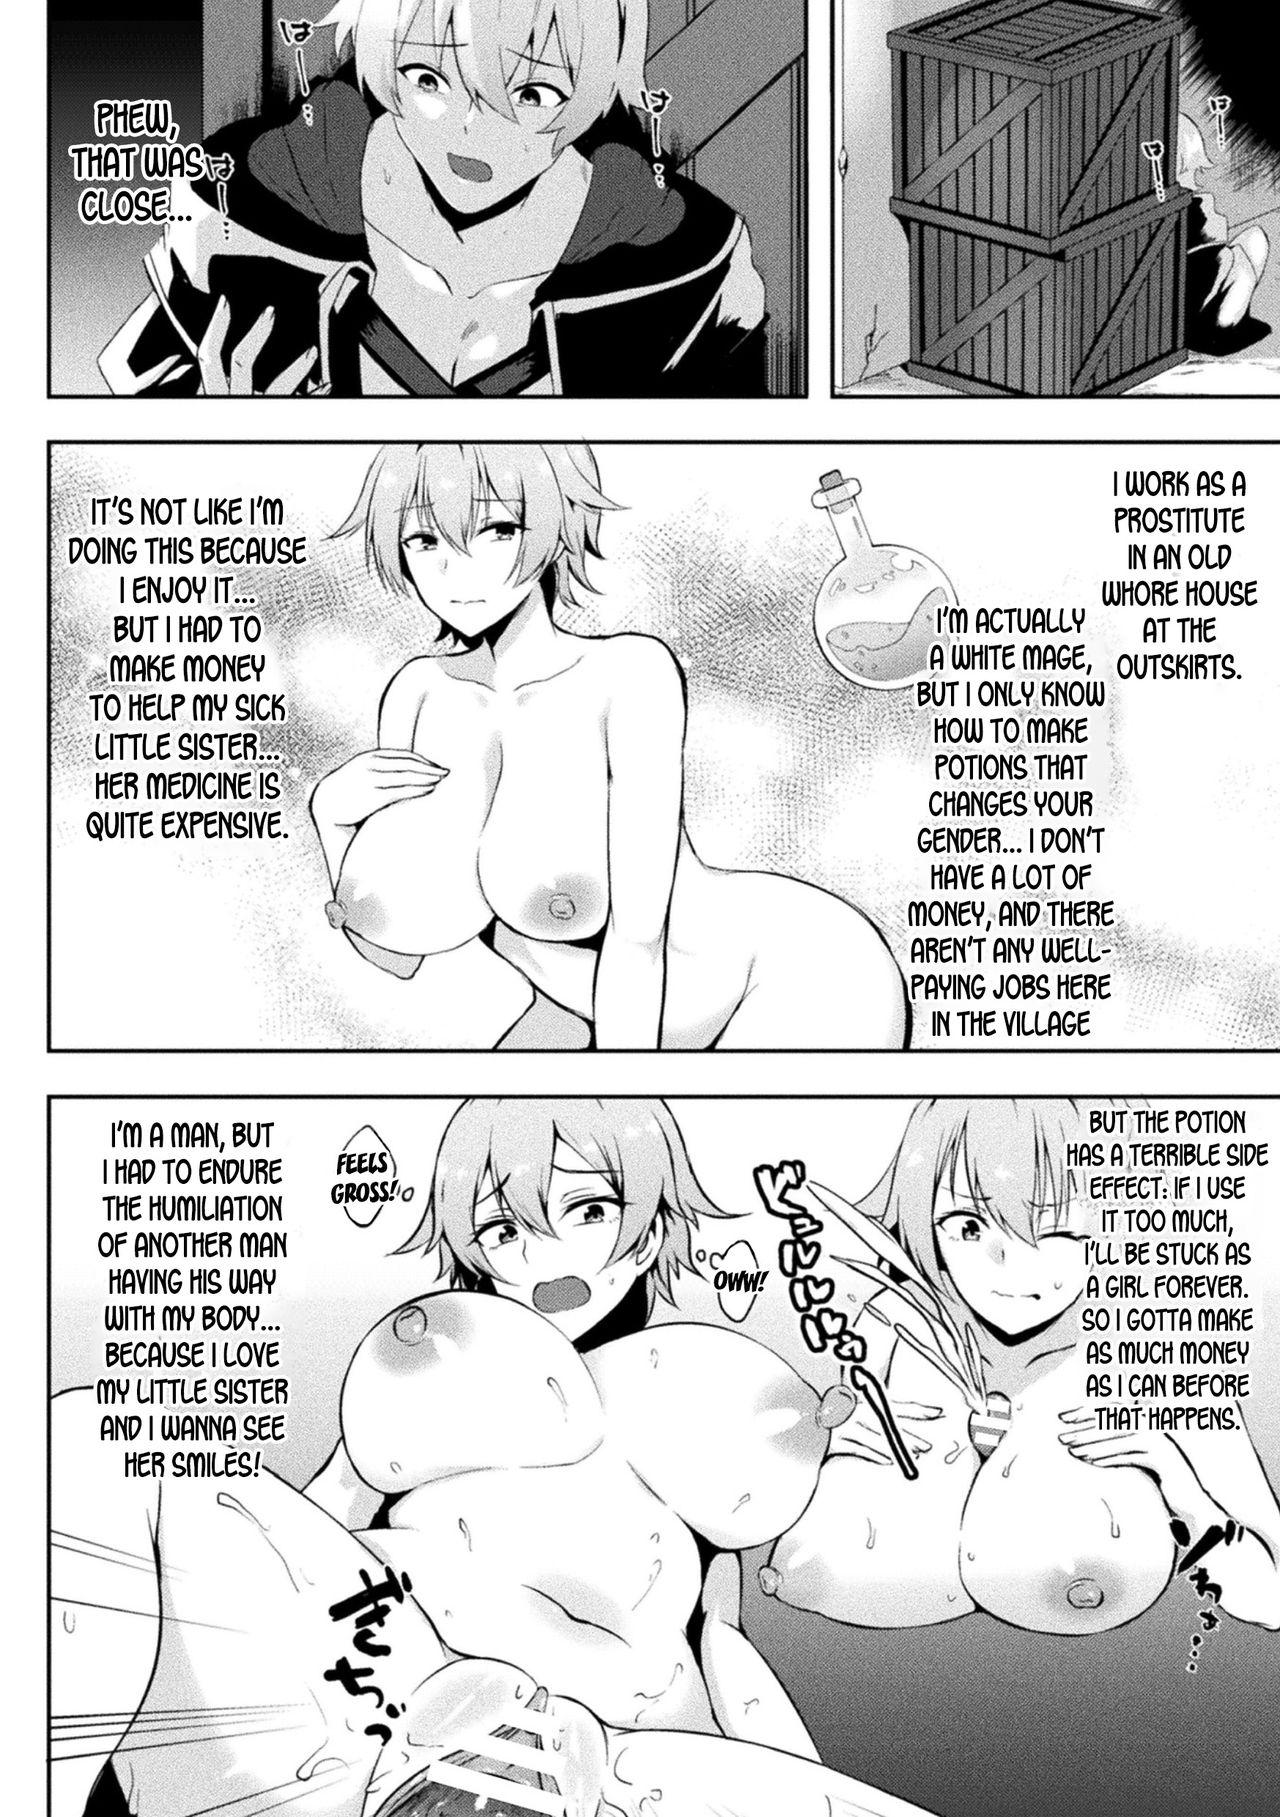 Party Soshite Ani wa Shou ni Ochiru | And then the Brother turned into a Prostitute Inked - Page 2